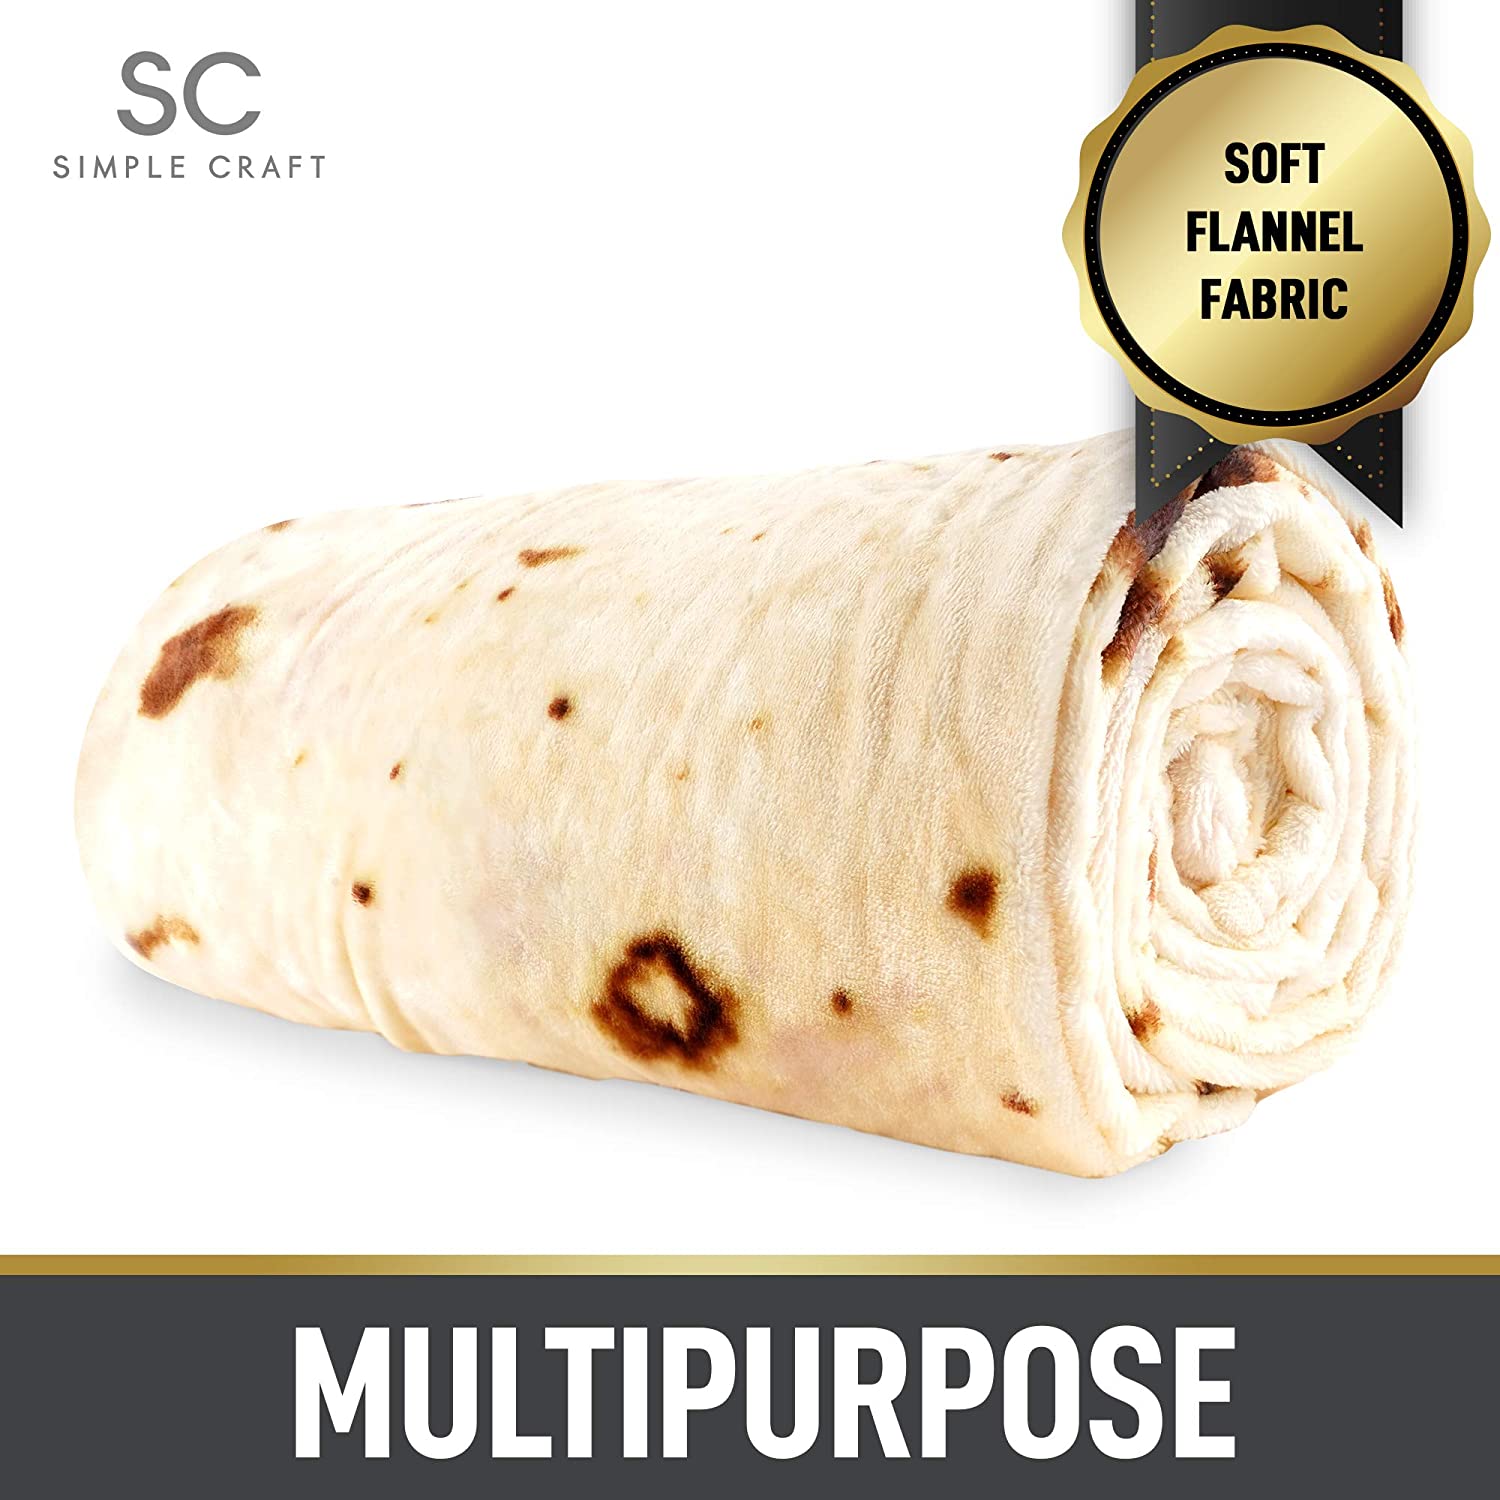 Simple Craft (60 Inch) Tortilla Giant Tortilla Blanket For Adults & Kids - Throw Blanket - For Indoors, Outdoors & More from Zulay Kitchen